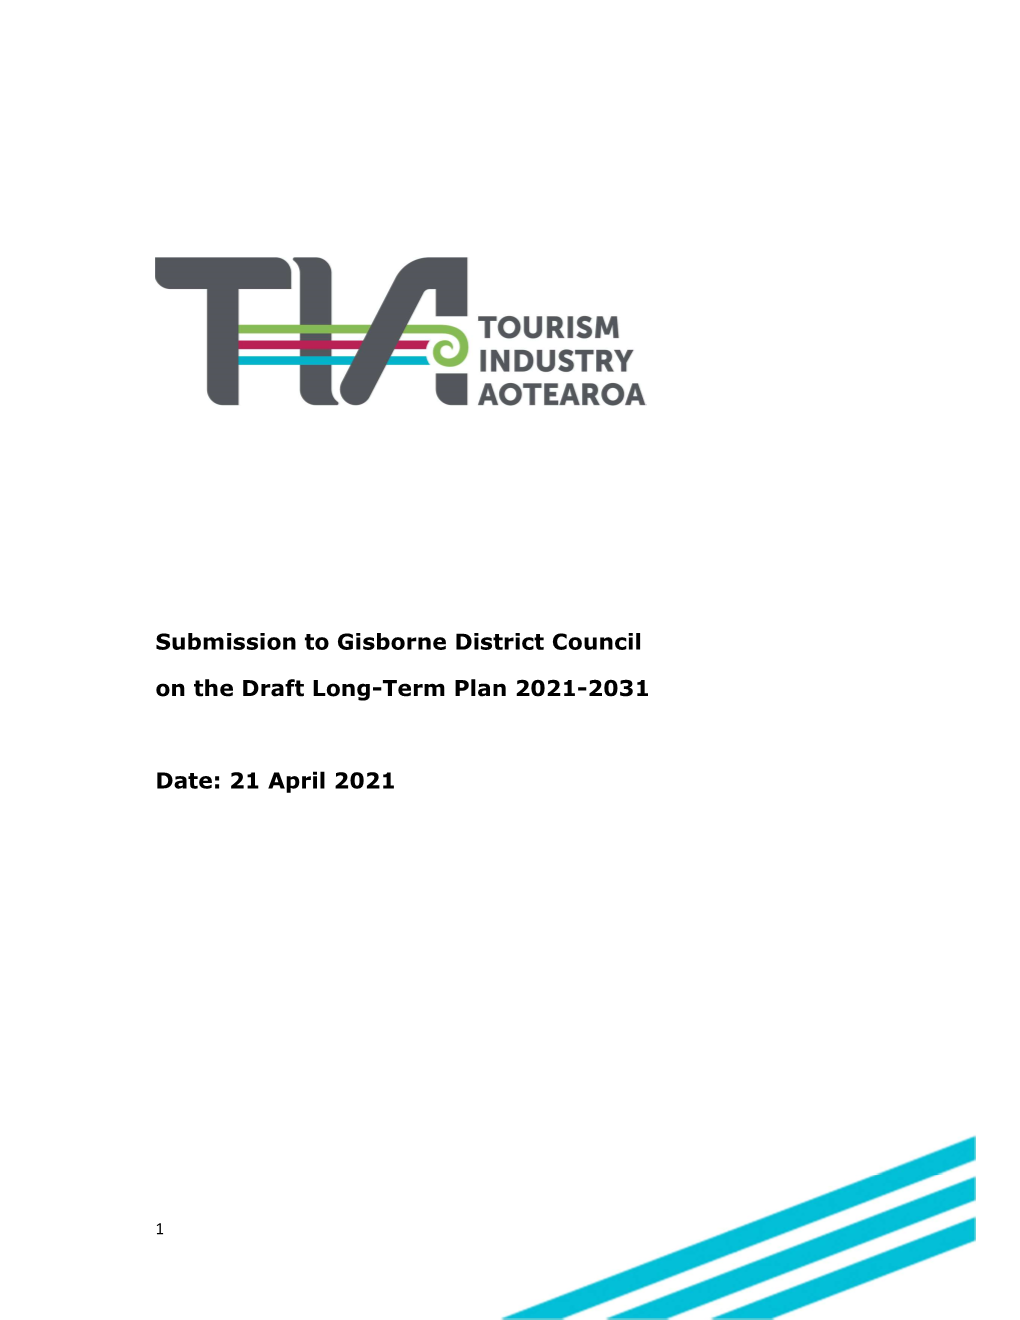 Submission to Gisborne District Council on the Draft Long-Term Plan 2021-2031